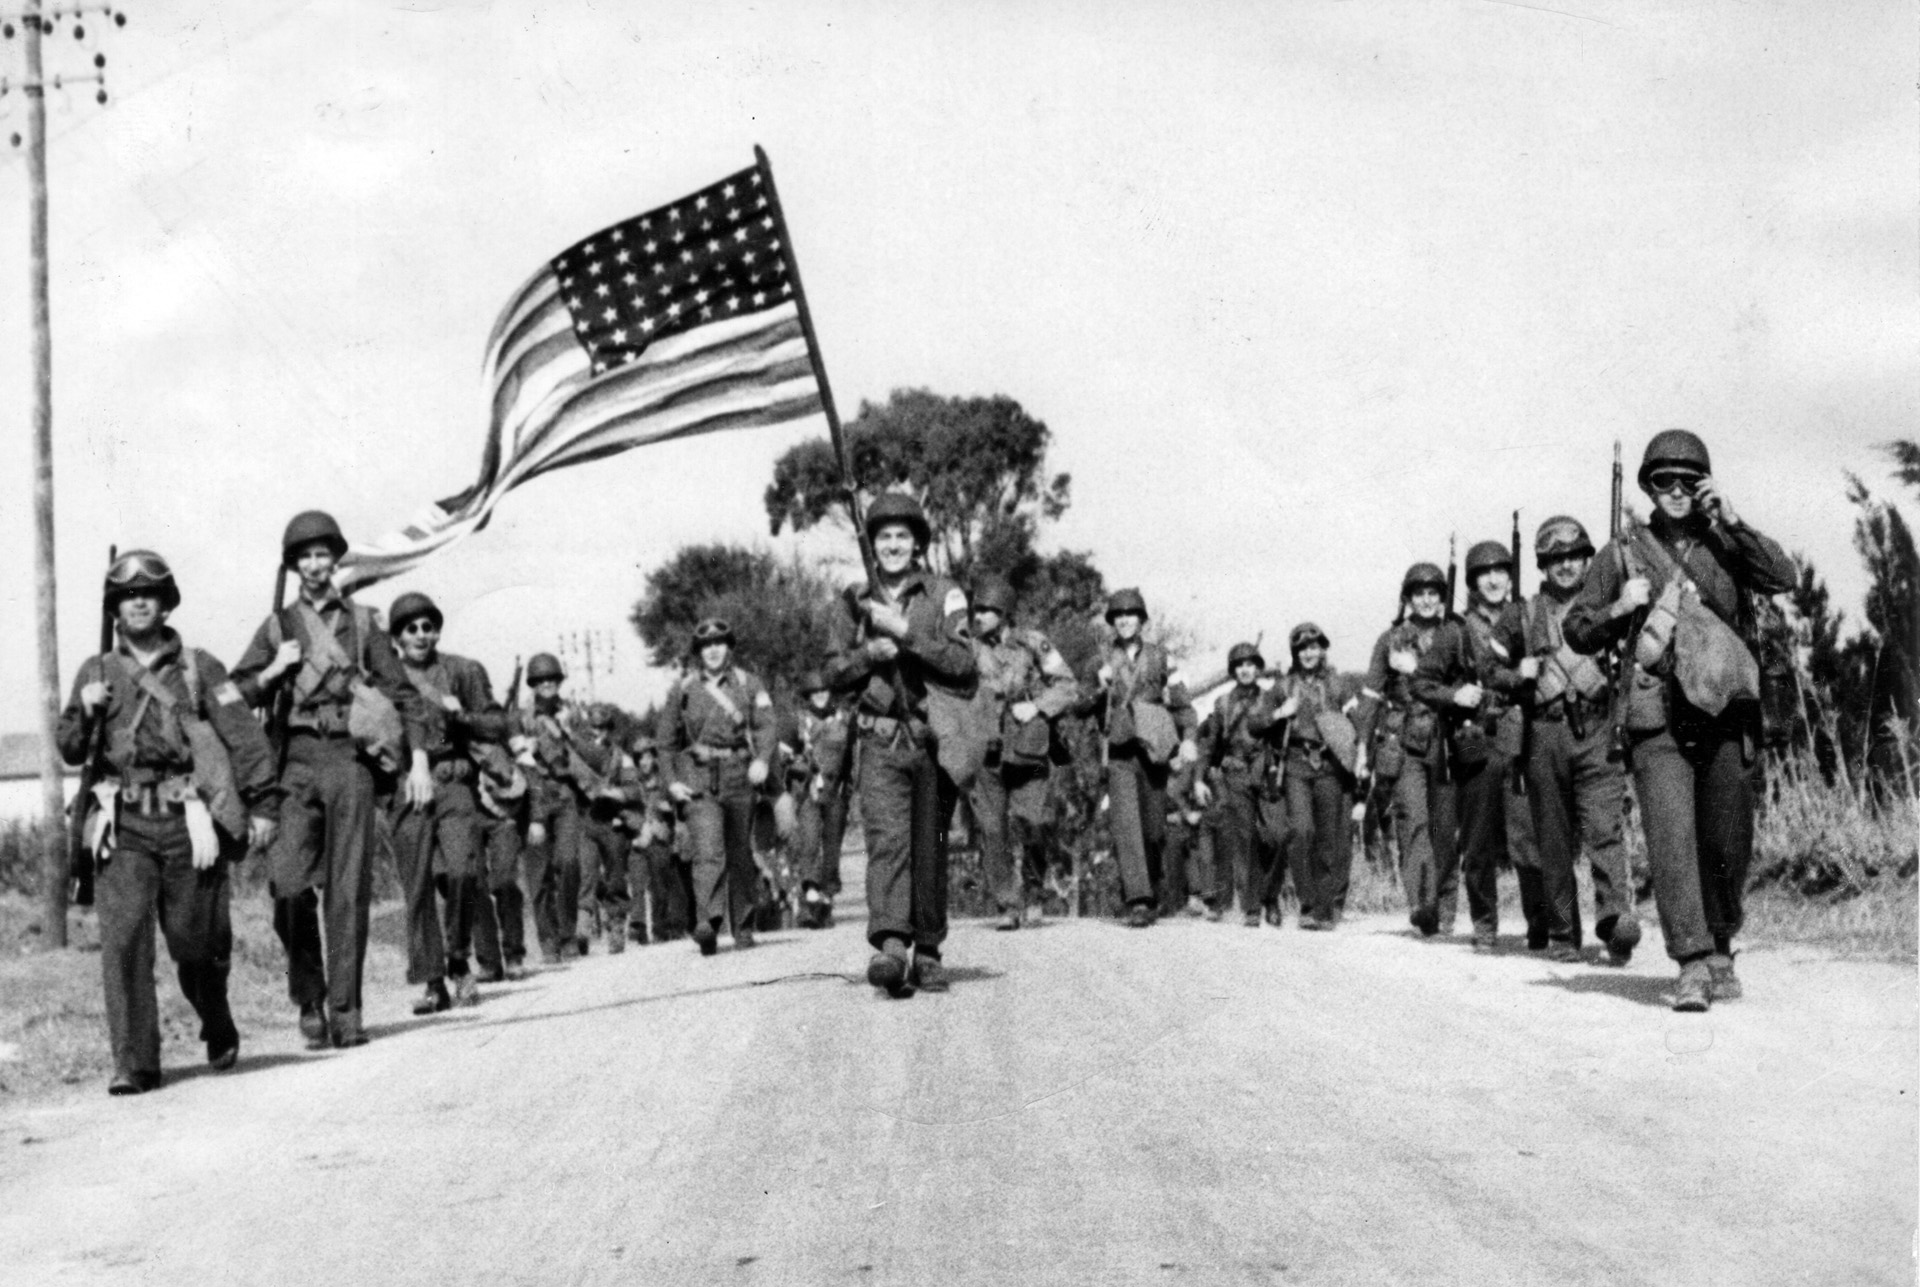 The 48-star U.S. flag catching the breeze at the head of their formation, U.S. paratroopers march toward the Maison Blanche airdrome, an installation near the city of Algiers. Maison Blanche served as a base for further airborne operations following the initial American drop during Operation Torch.